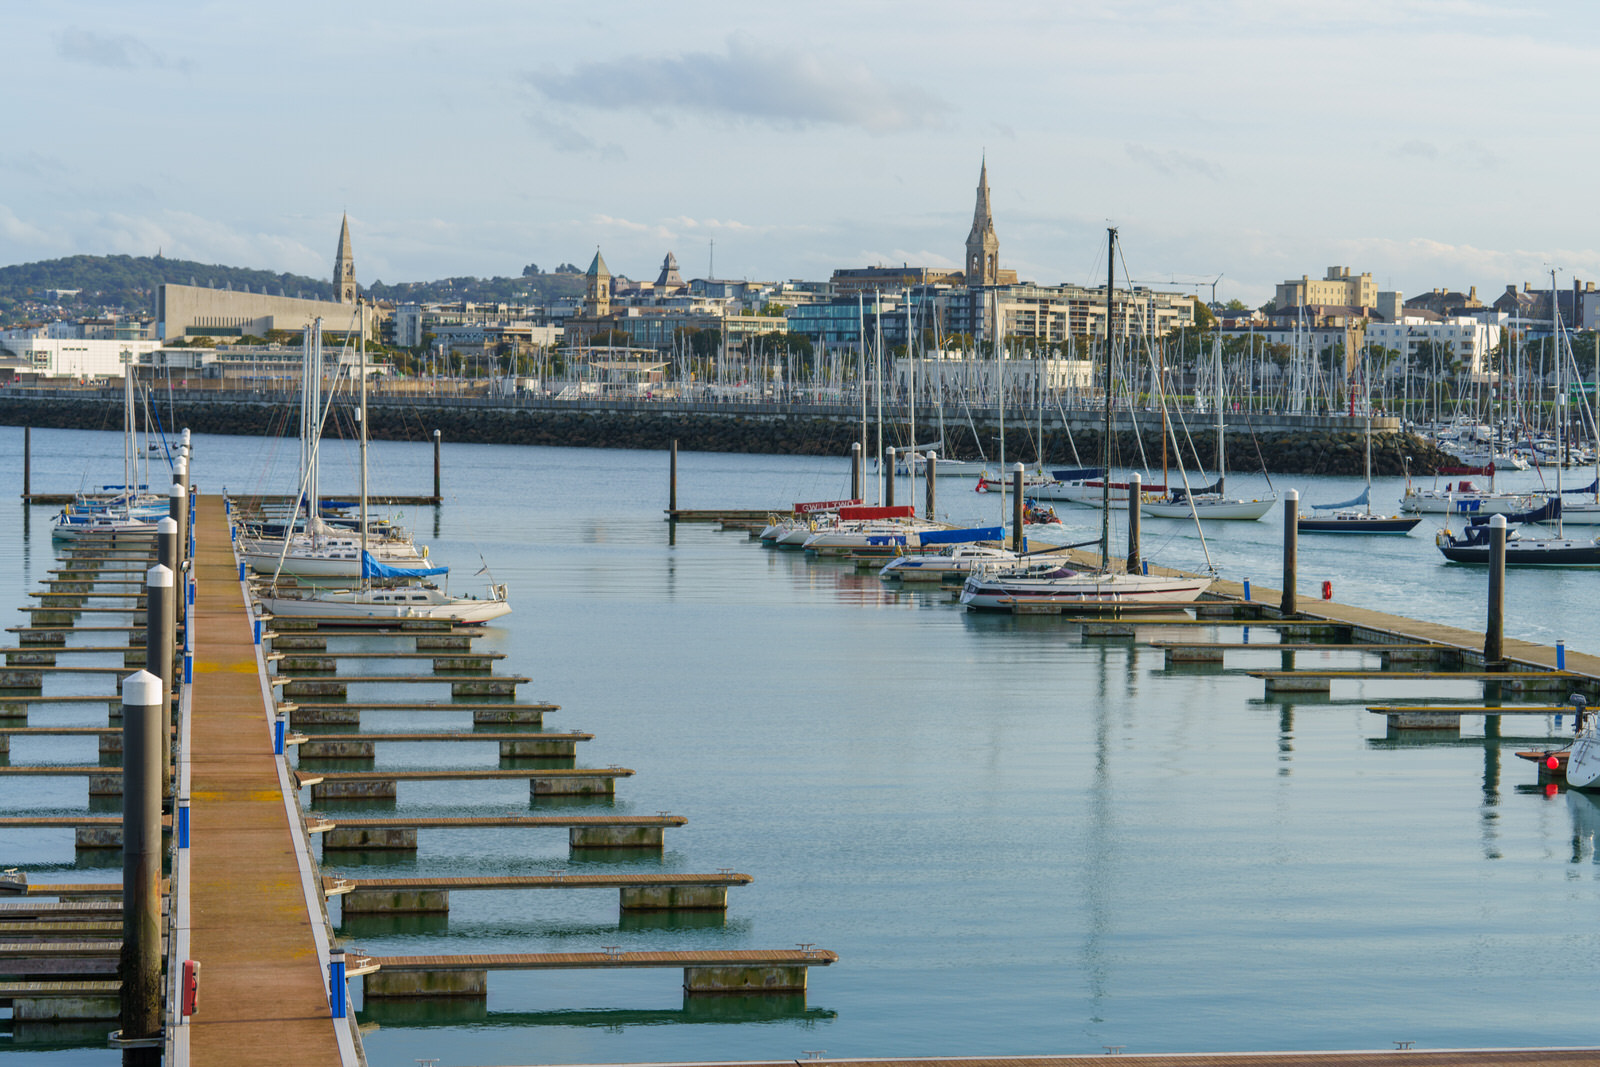 THE SECTION OF THE MARINA NEAR THE WESTERN BREAKWATER [DUN LAOGHAIRE HARBOUR]
 002